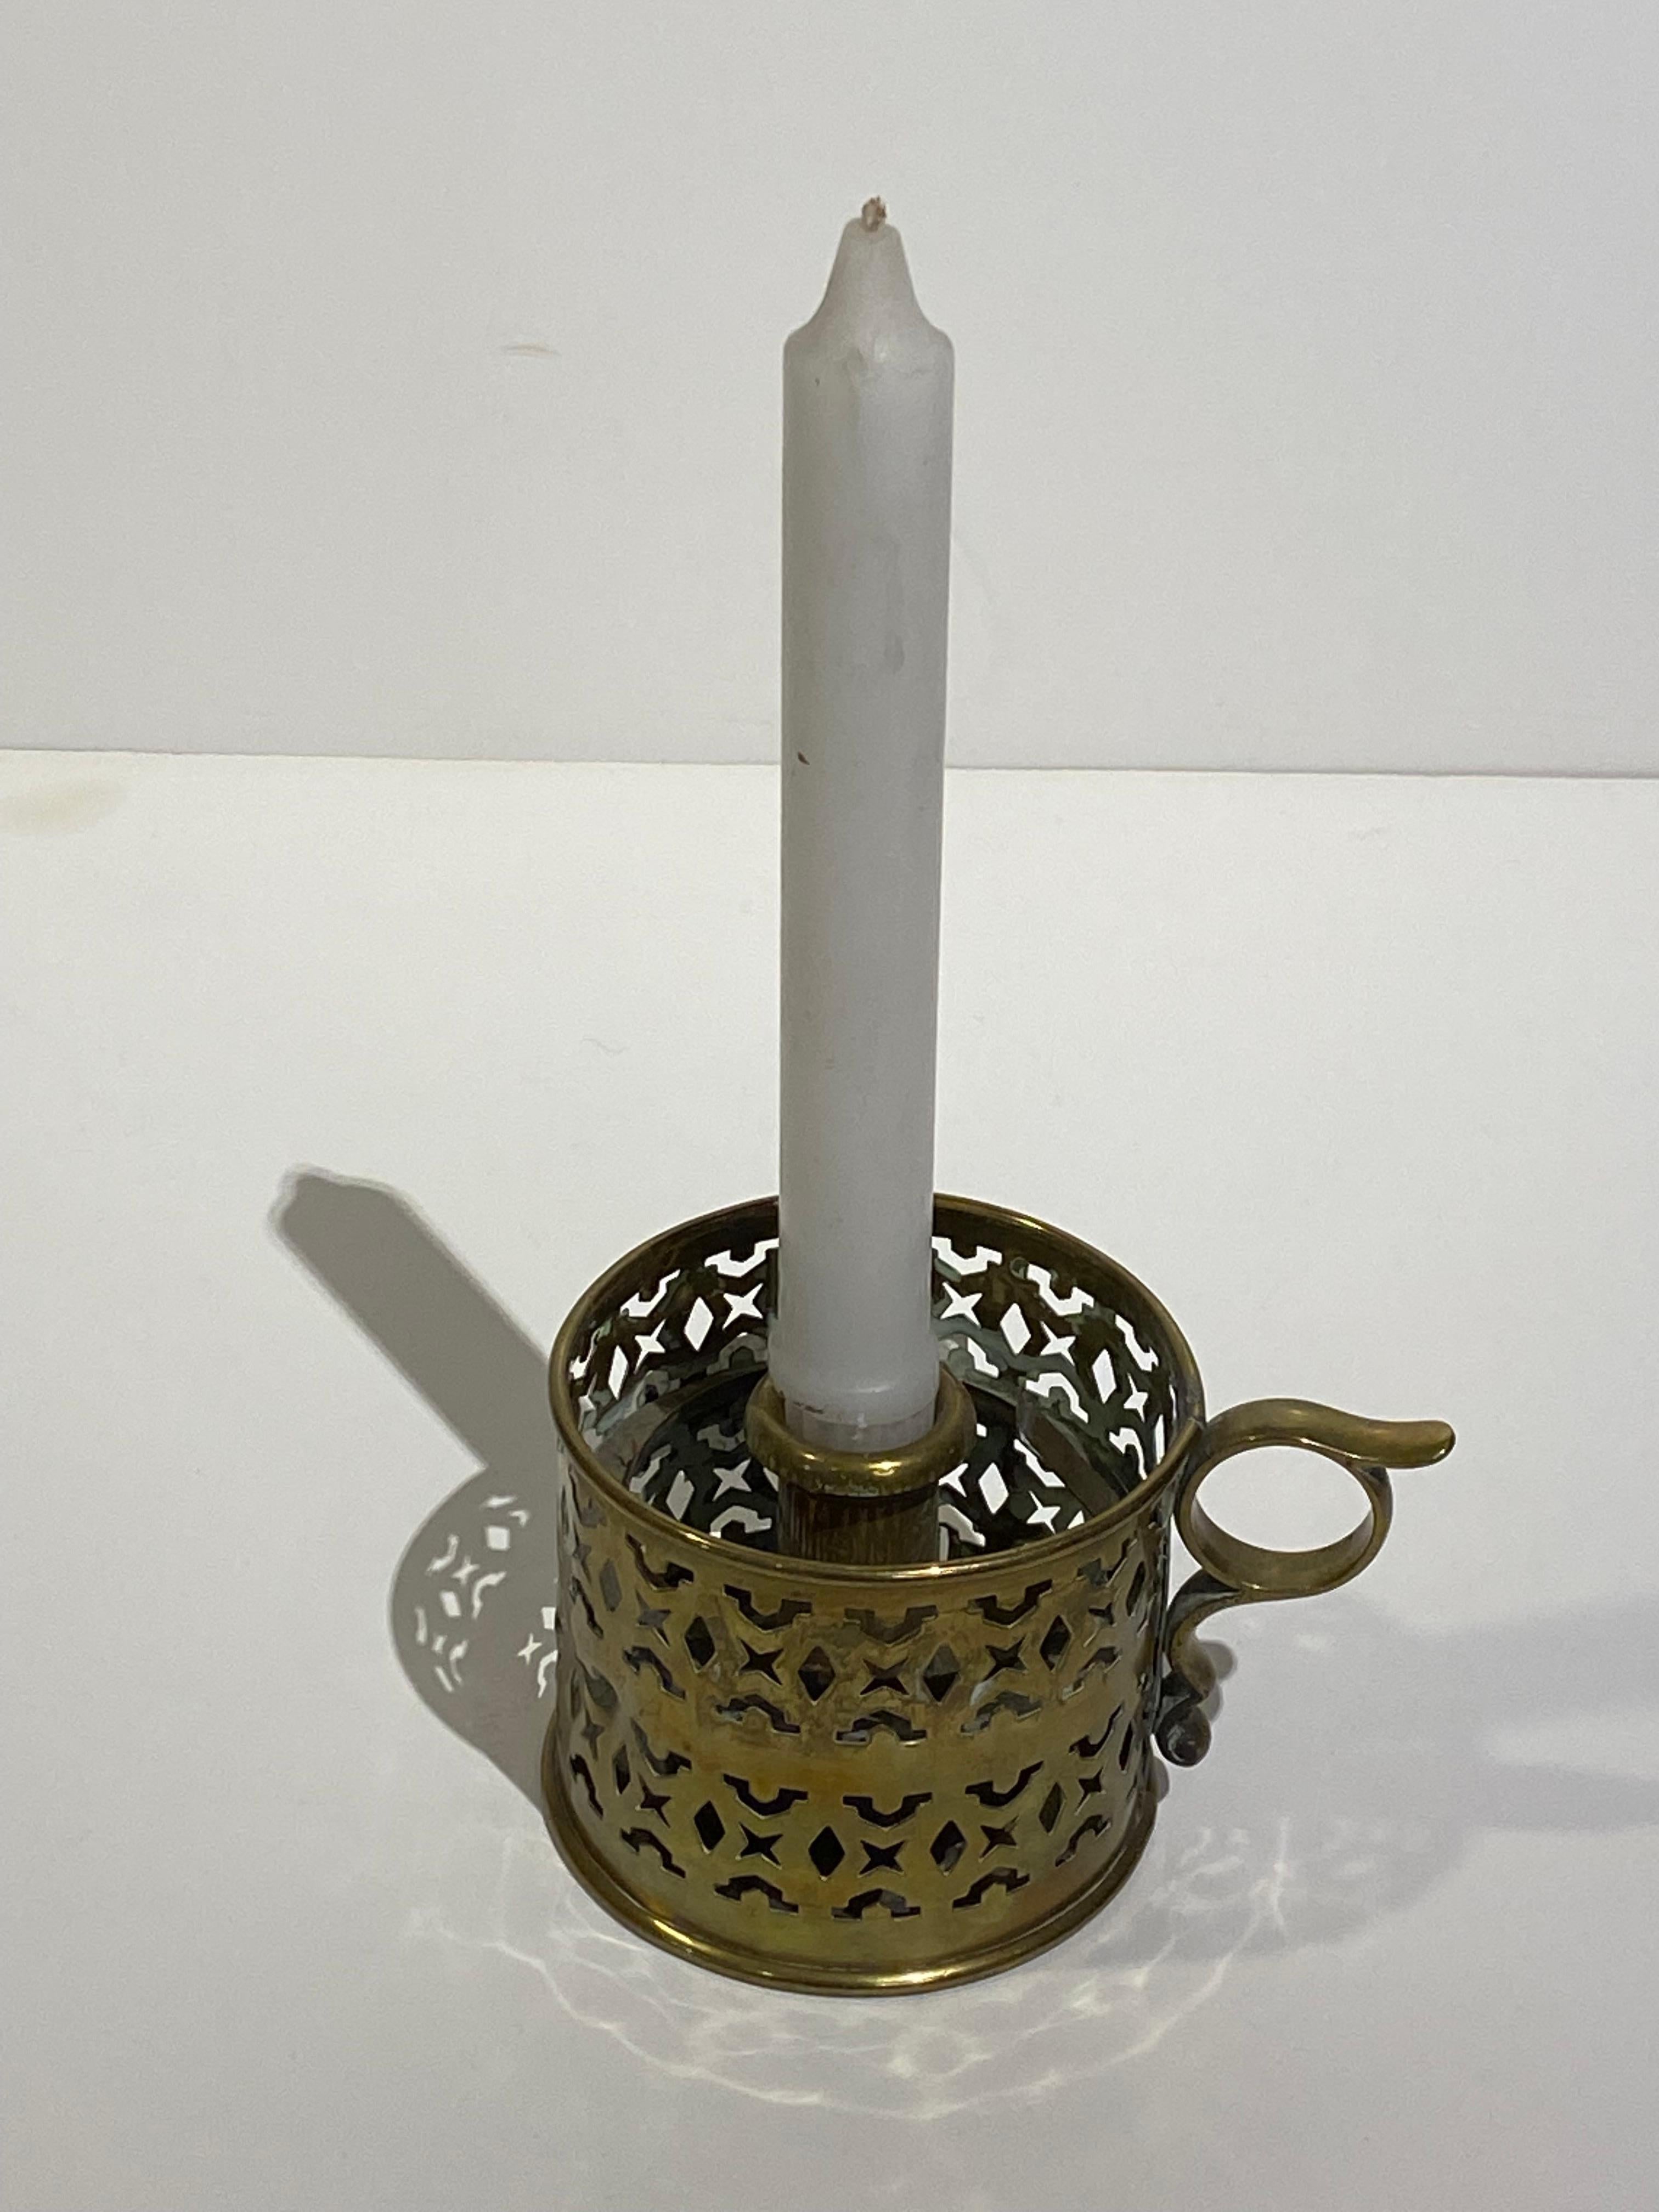 19th Century Pierced Brass Chamber Candlestick from England.